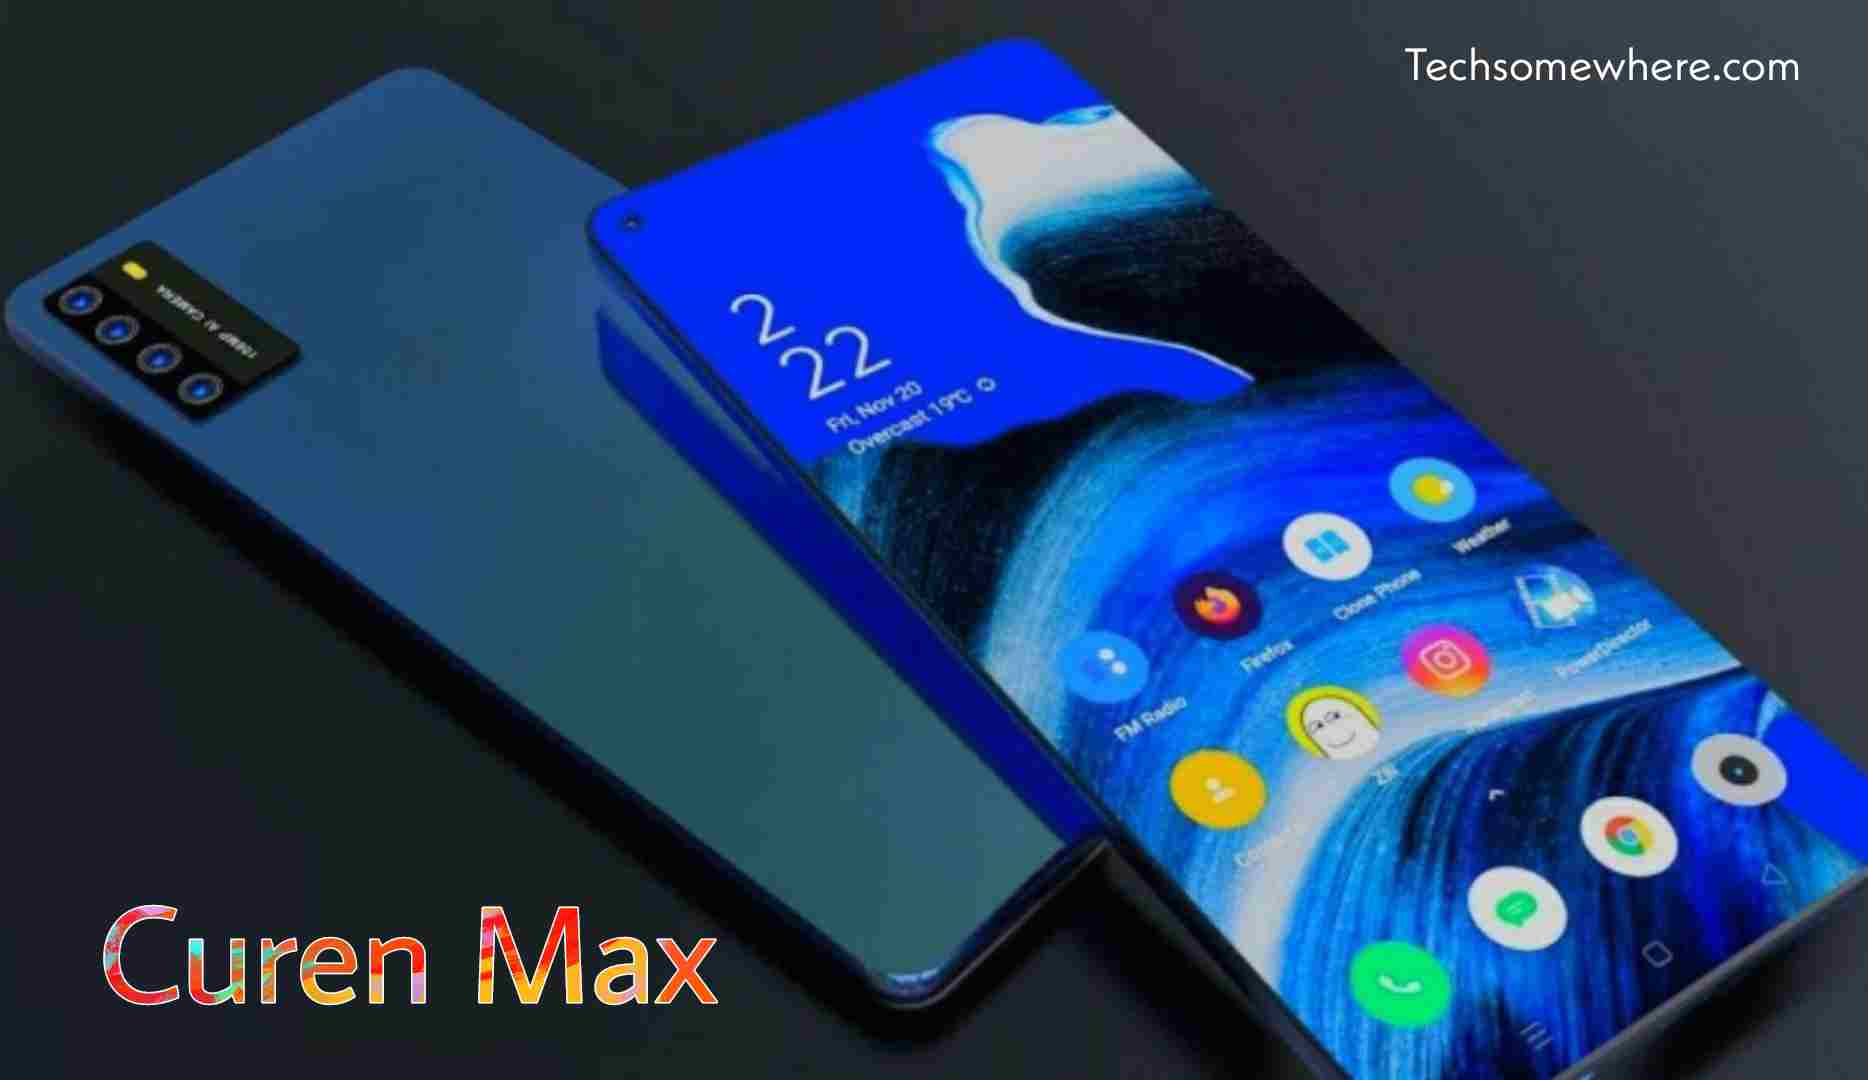 Nokia Curren Max 5G (2022) Release Date, Price, Secret Features And Specifications